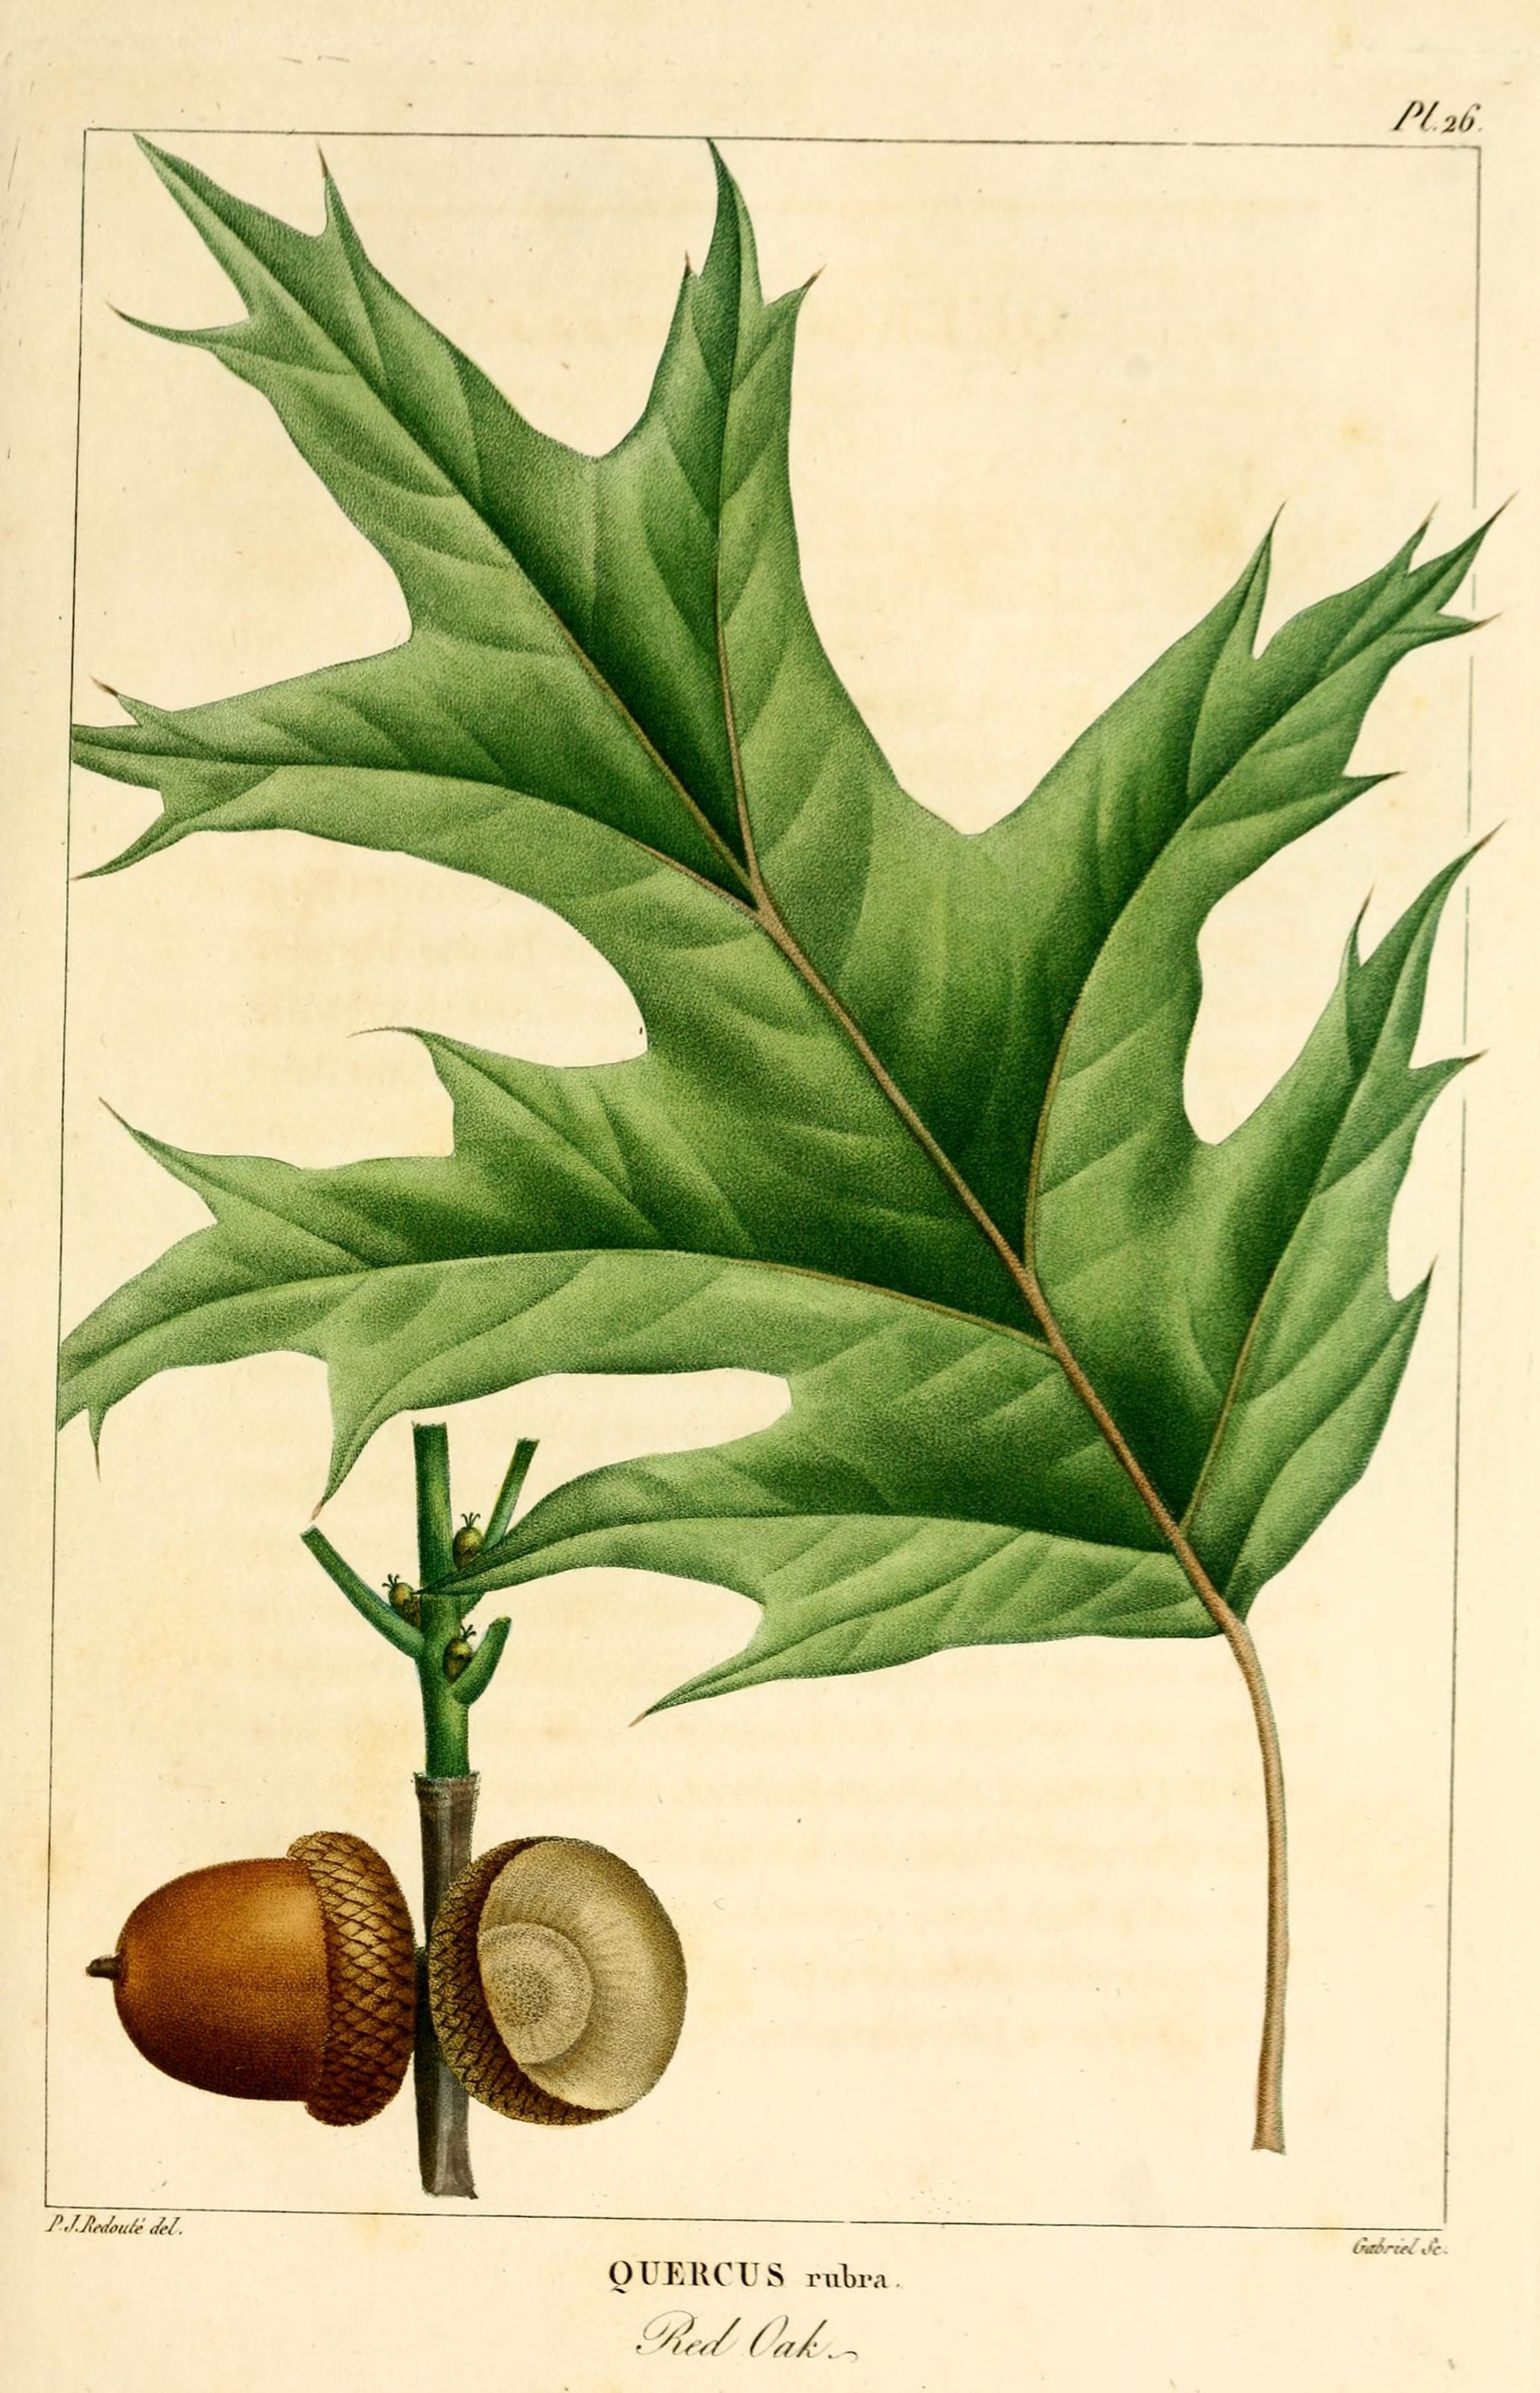 Quercus rubra (rights holder: Biodiversity Heritage Library)